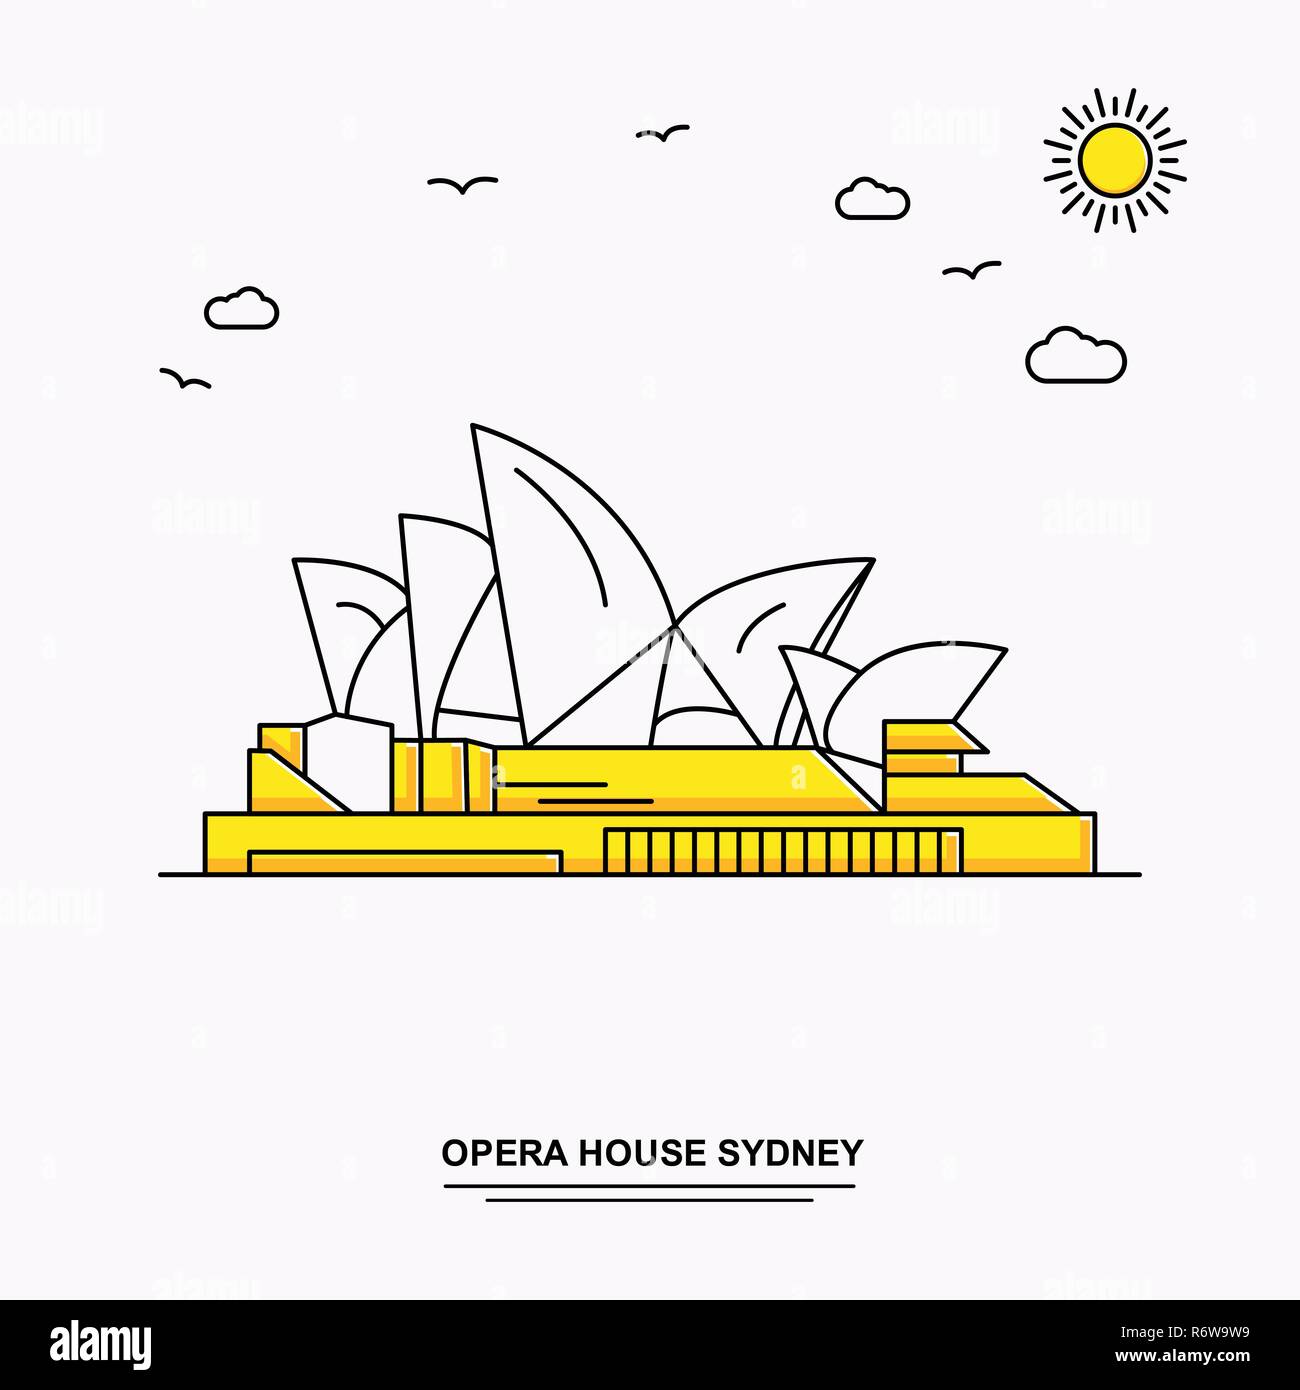 OPERA HOUSE Monument Poster Template. World Travel Yellow illustration Background in Line Style with beauture nature Scene Stock Vector